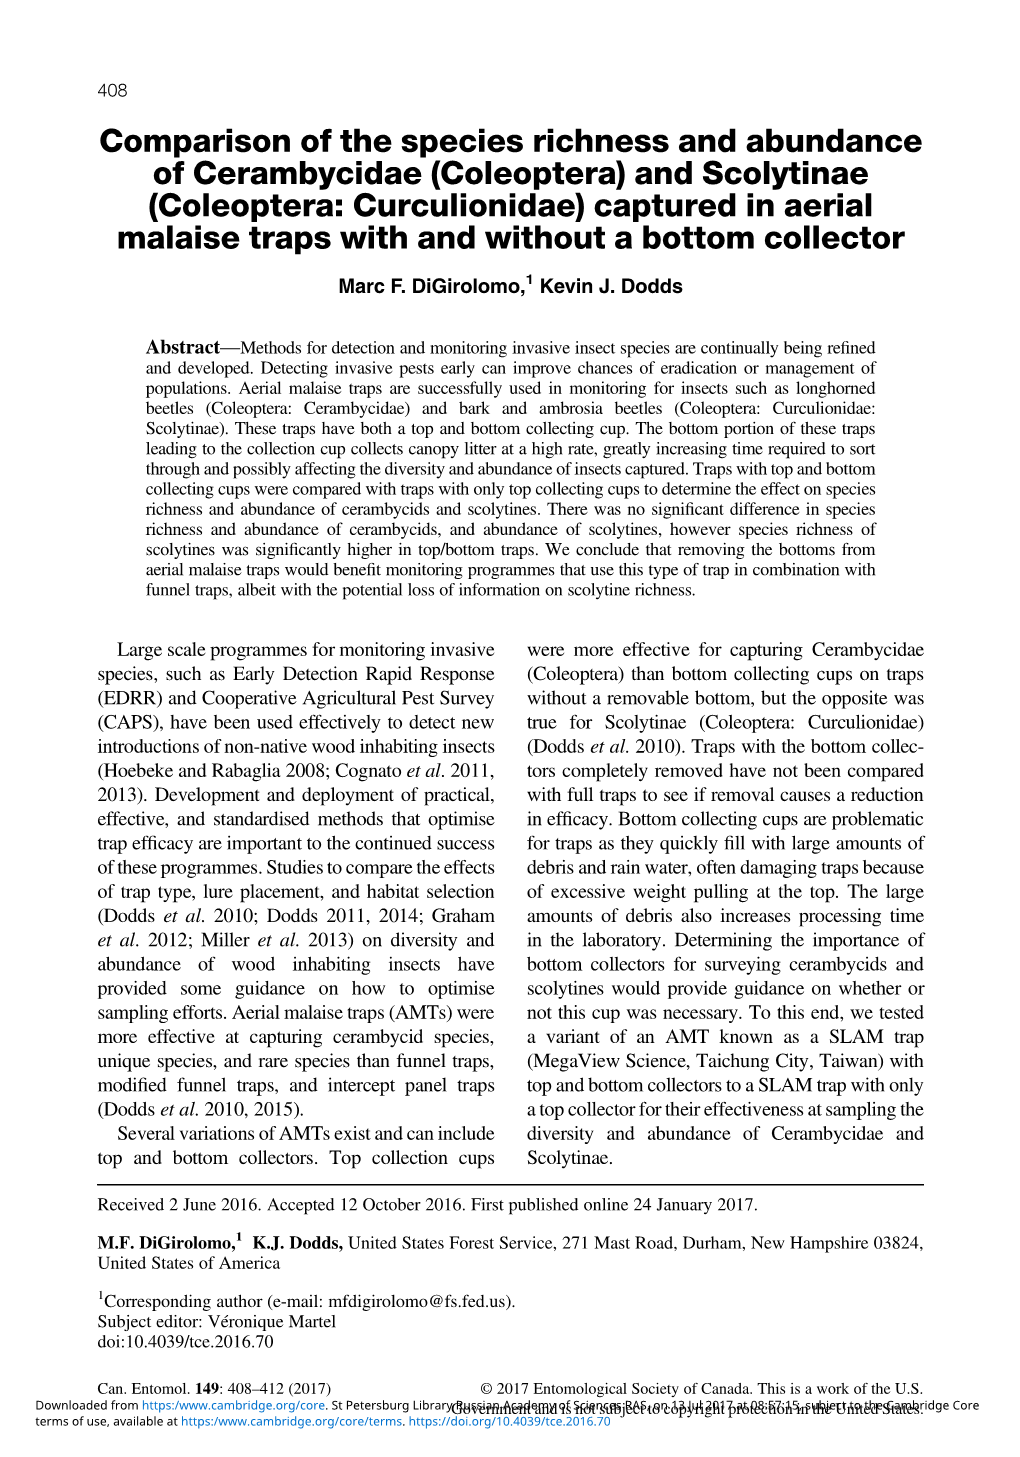 (Coleoptera) and Scolytinae (Coleoptera: Curculionidae) Captured in Aerial Malaise Traps with and Without a Bottom Collector Marc F